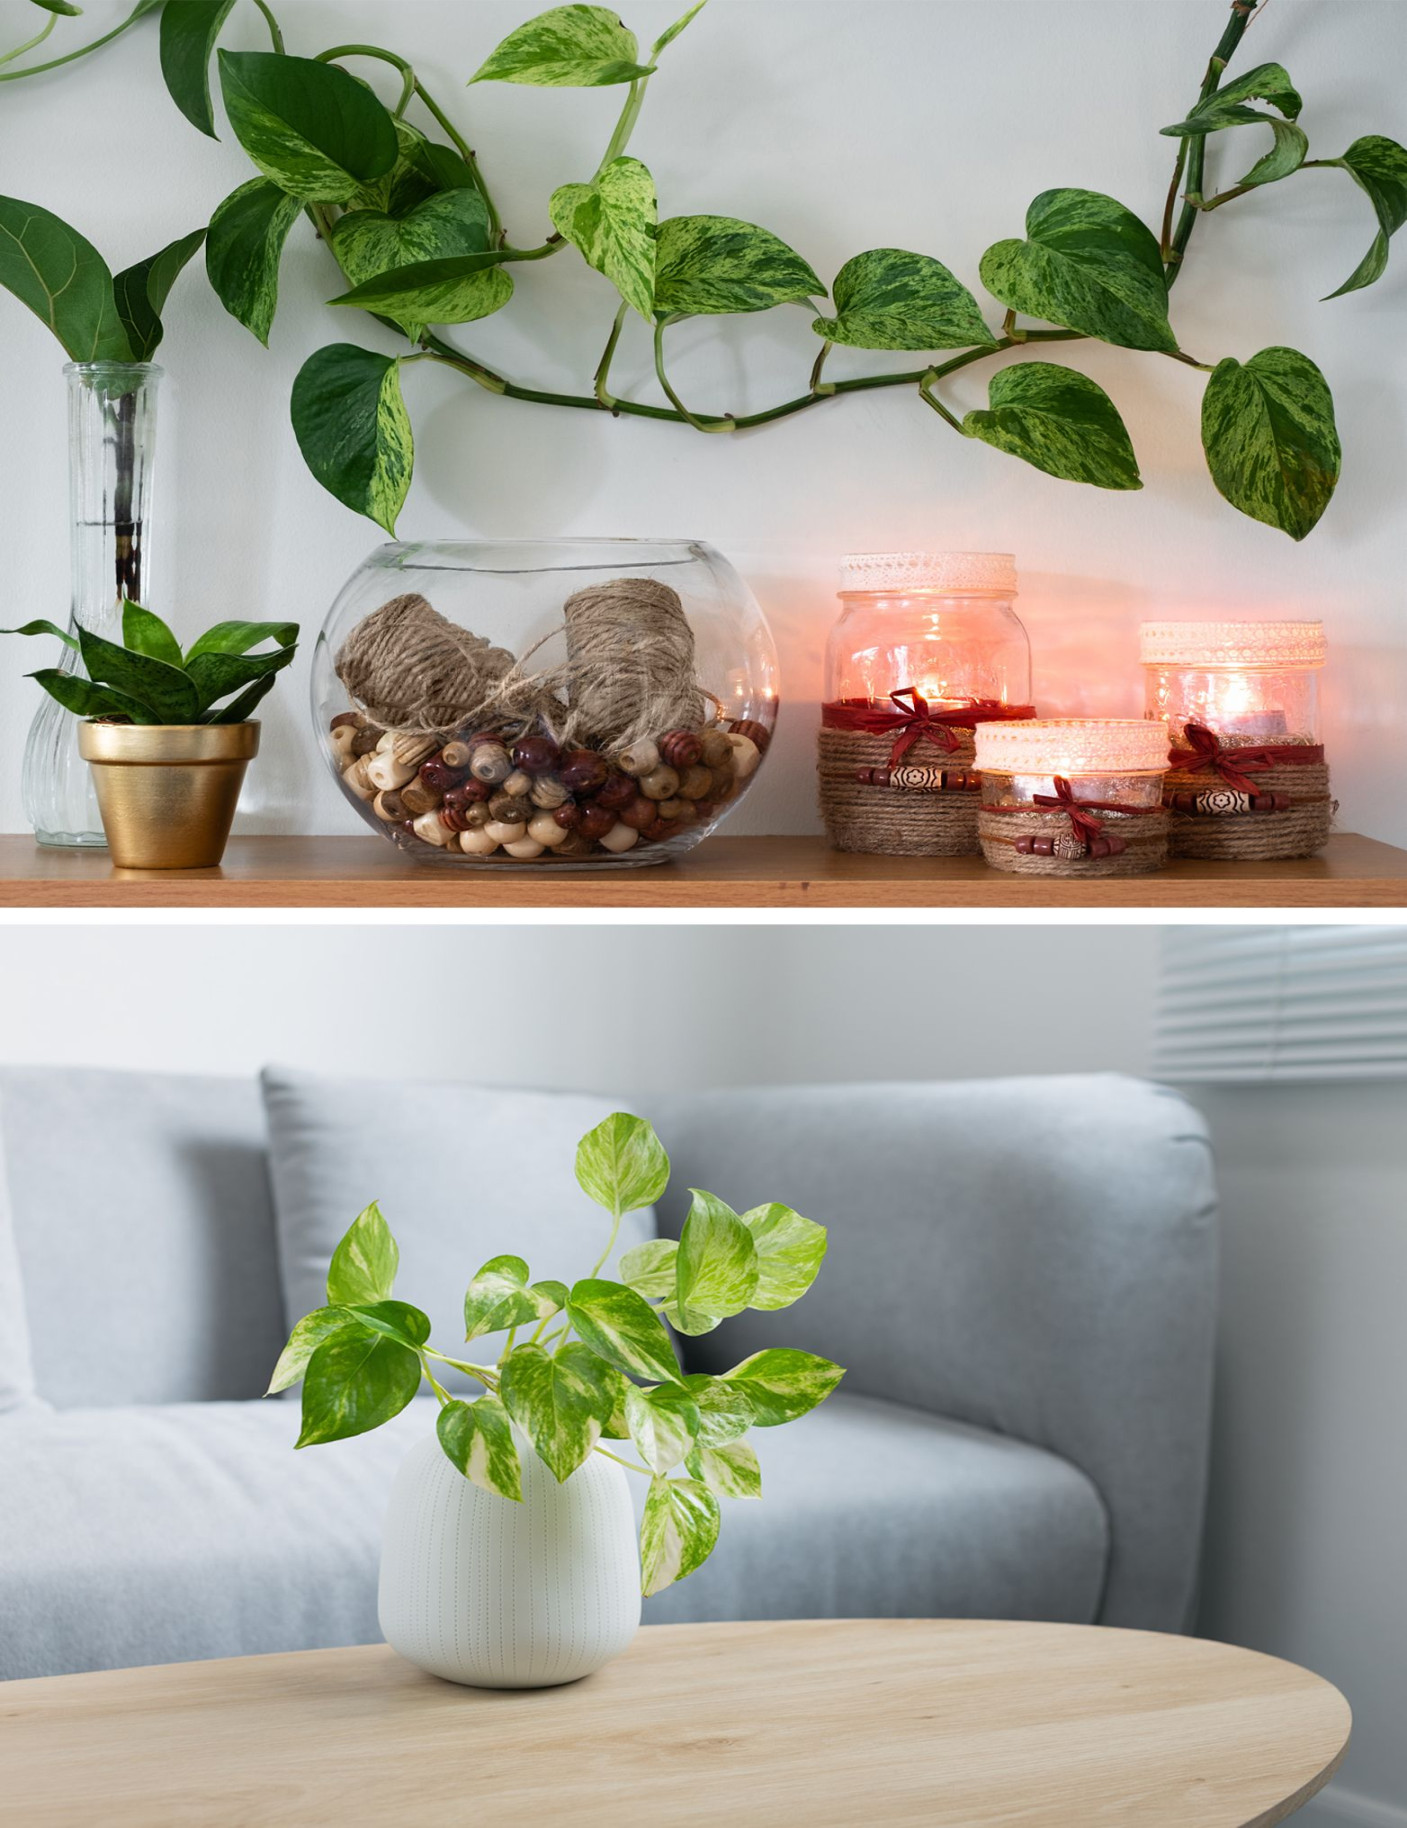 + Money Plant Vastu Tips to Bring Good Fortune into Your Life